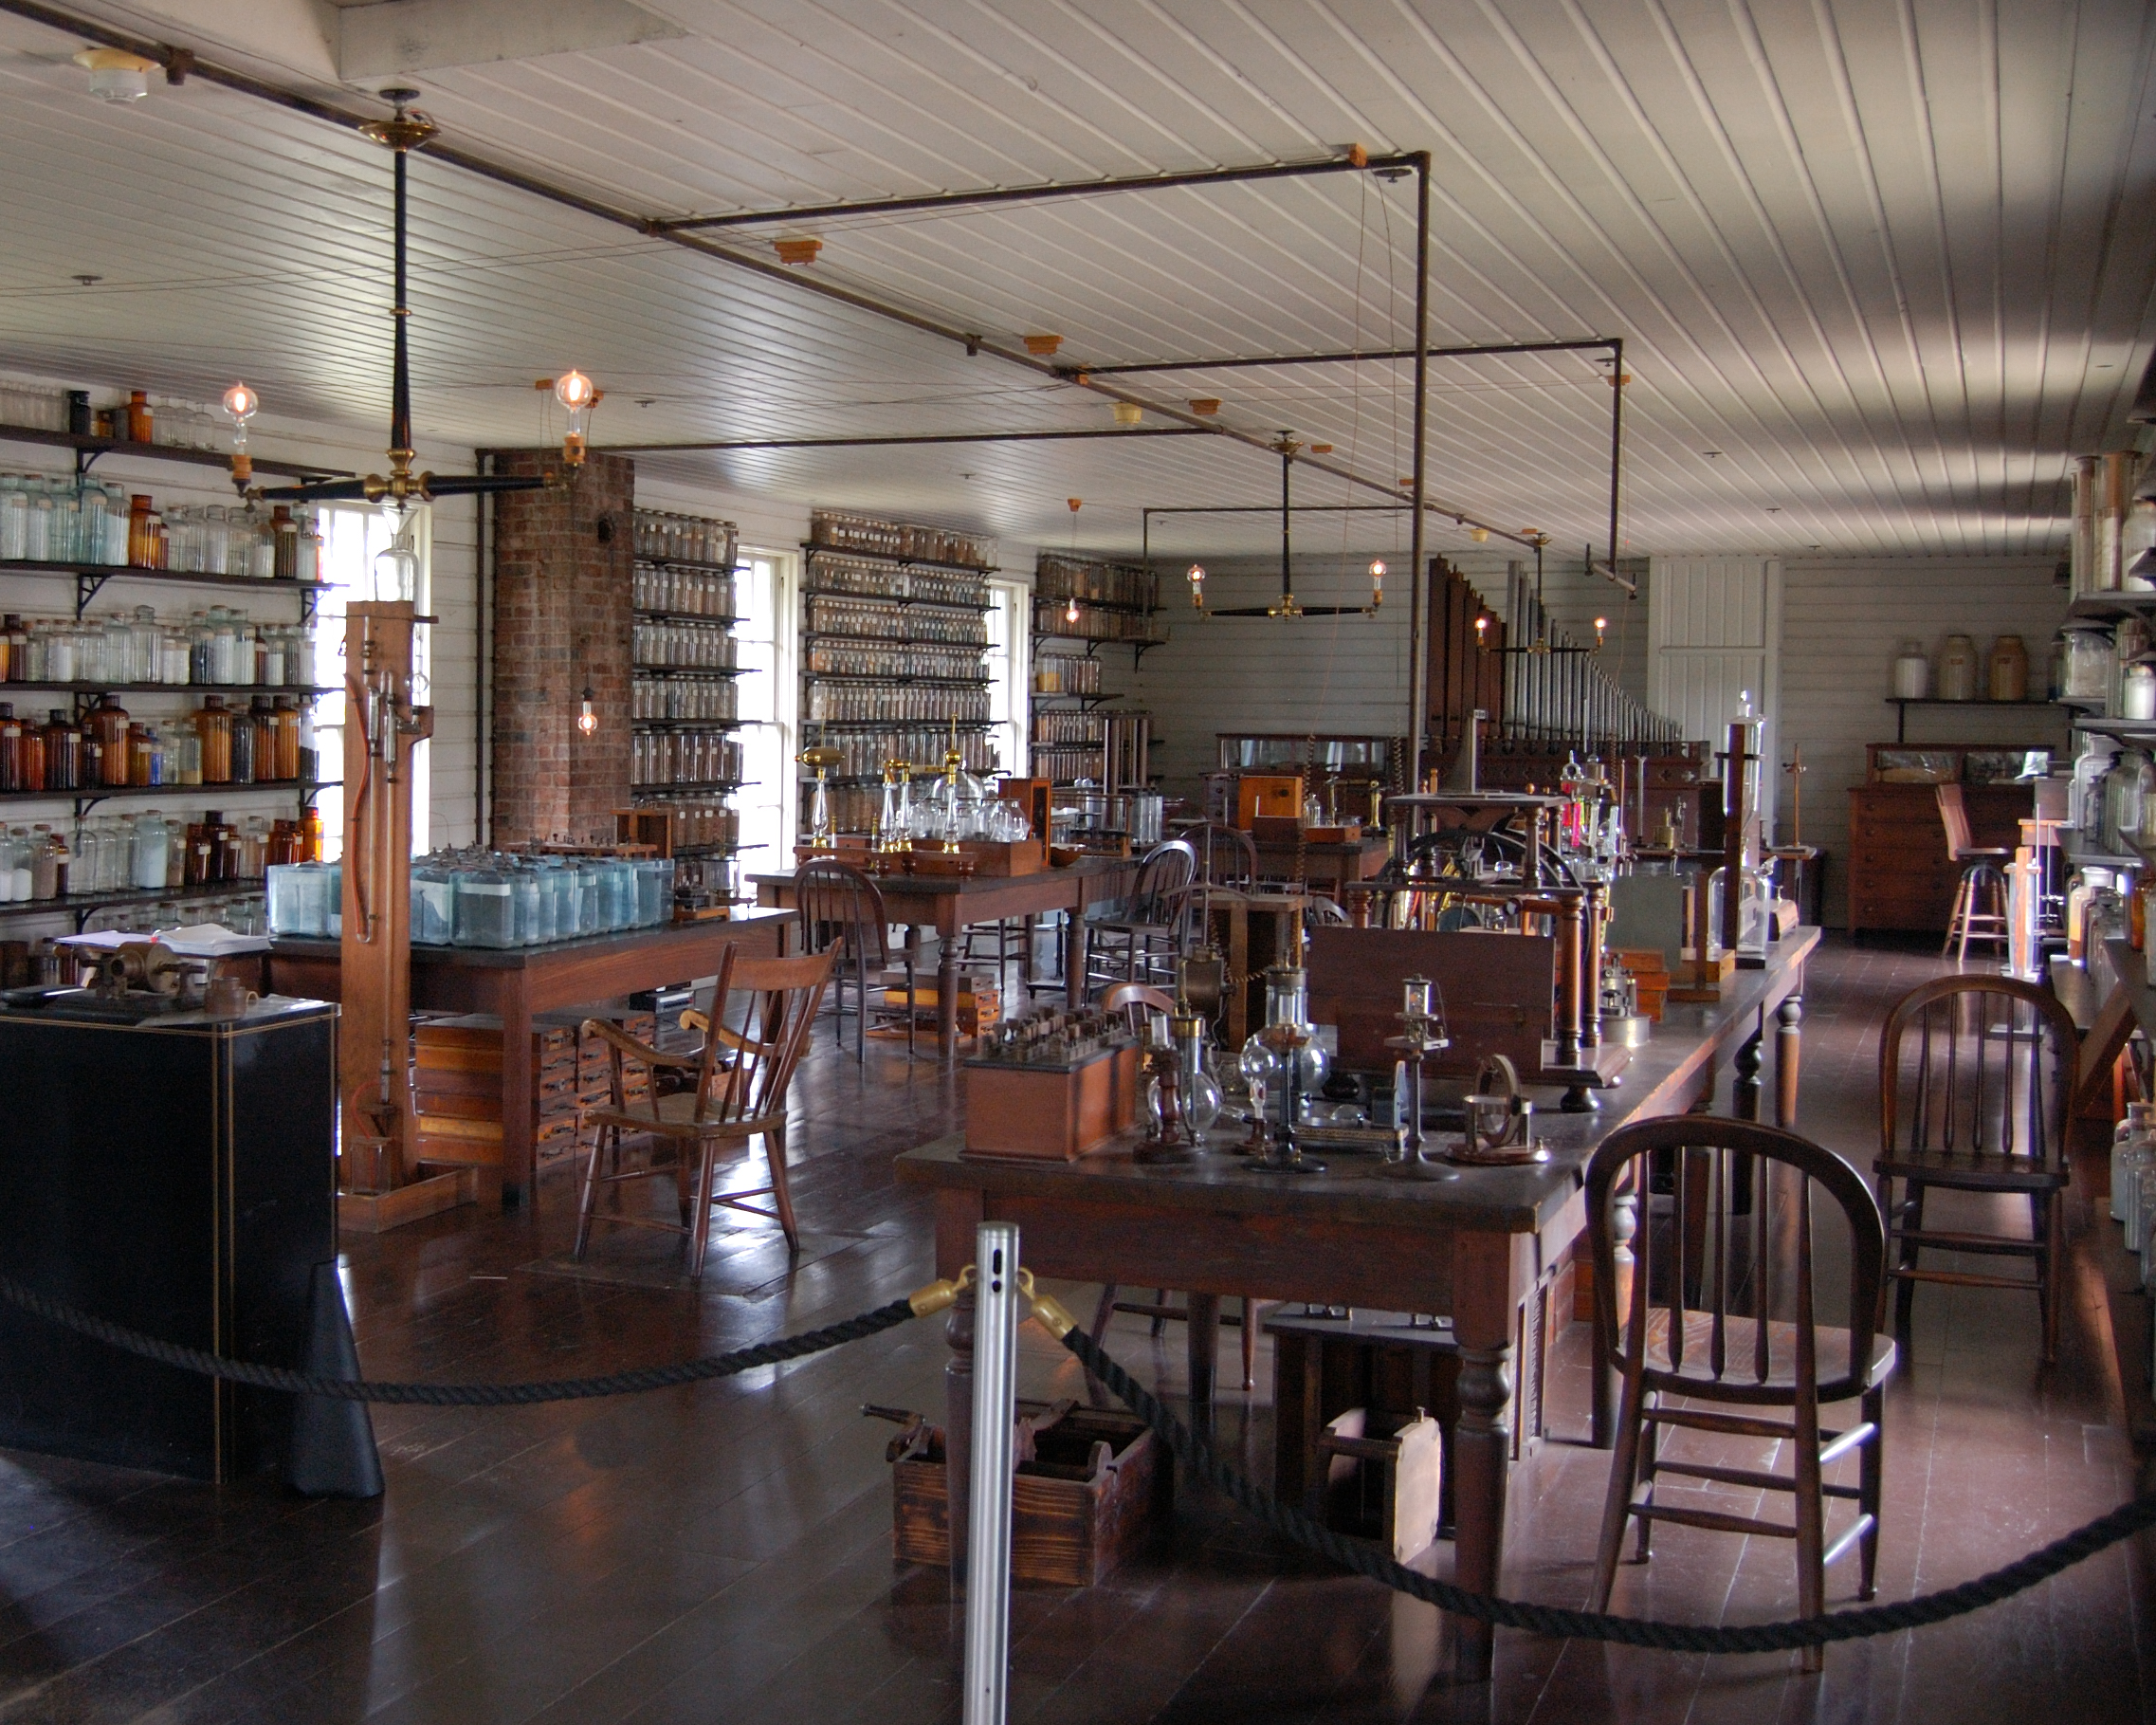 Ever wondered how many software engineers it takes to change a light bulb? This post gives you project management and software engineering analytics tools to answer that question. Pictured here is Thomas Edison's Menlo Park laboratory, where a major engineering project was needed to invent the lightbulb in the first place. Photo: Wikimedia/Andrew Balet/CC-BY-SA-2.5